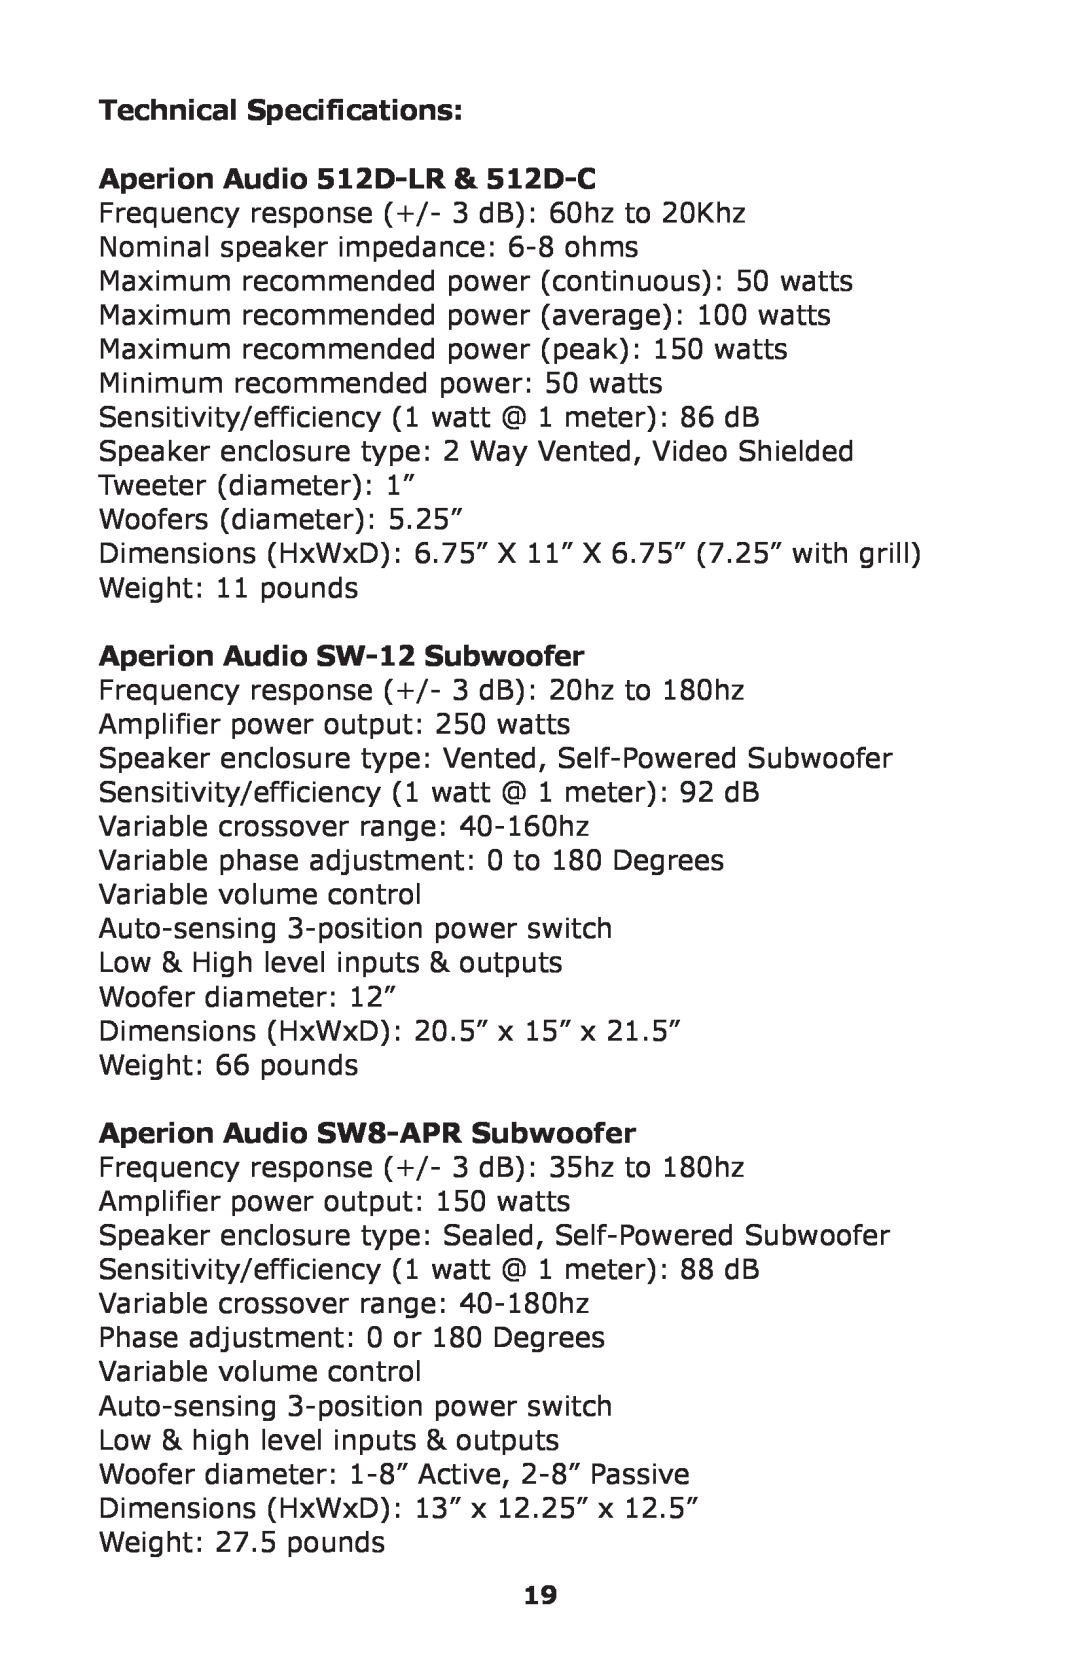 Aperion Audio SW8-APR owner manual Technical Specifications, Aperion Audio SW-12Subwoofer 